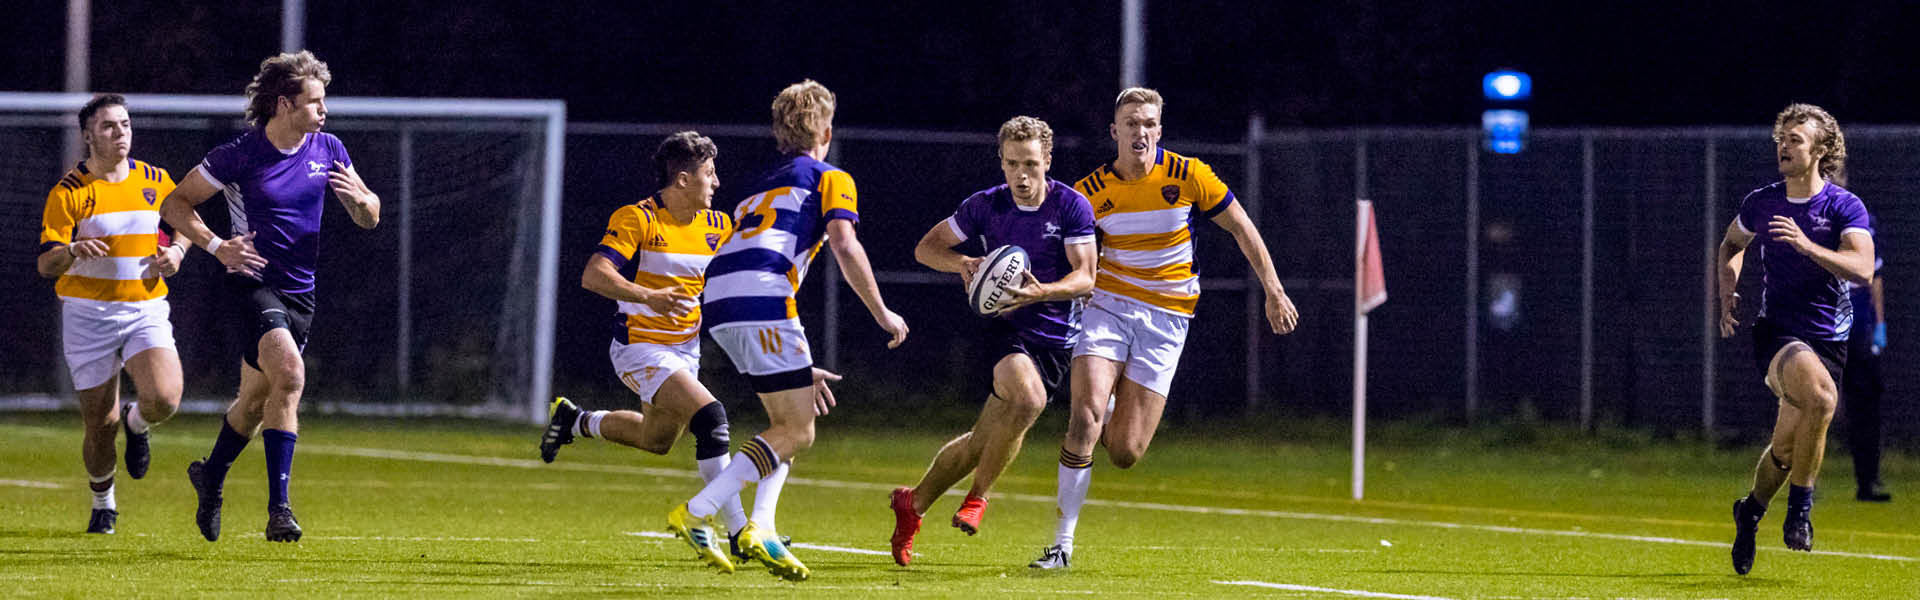 Men’s rugby game featuring the Western Mustangs